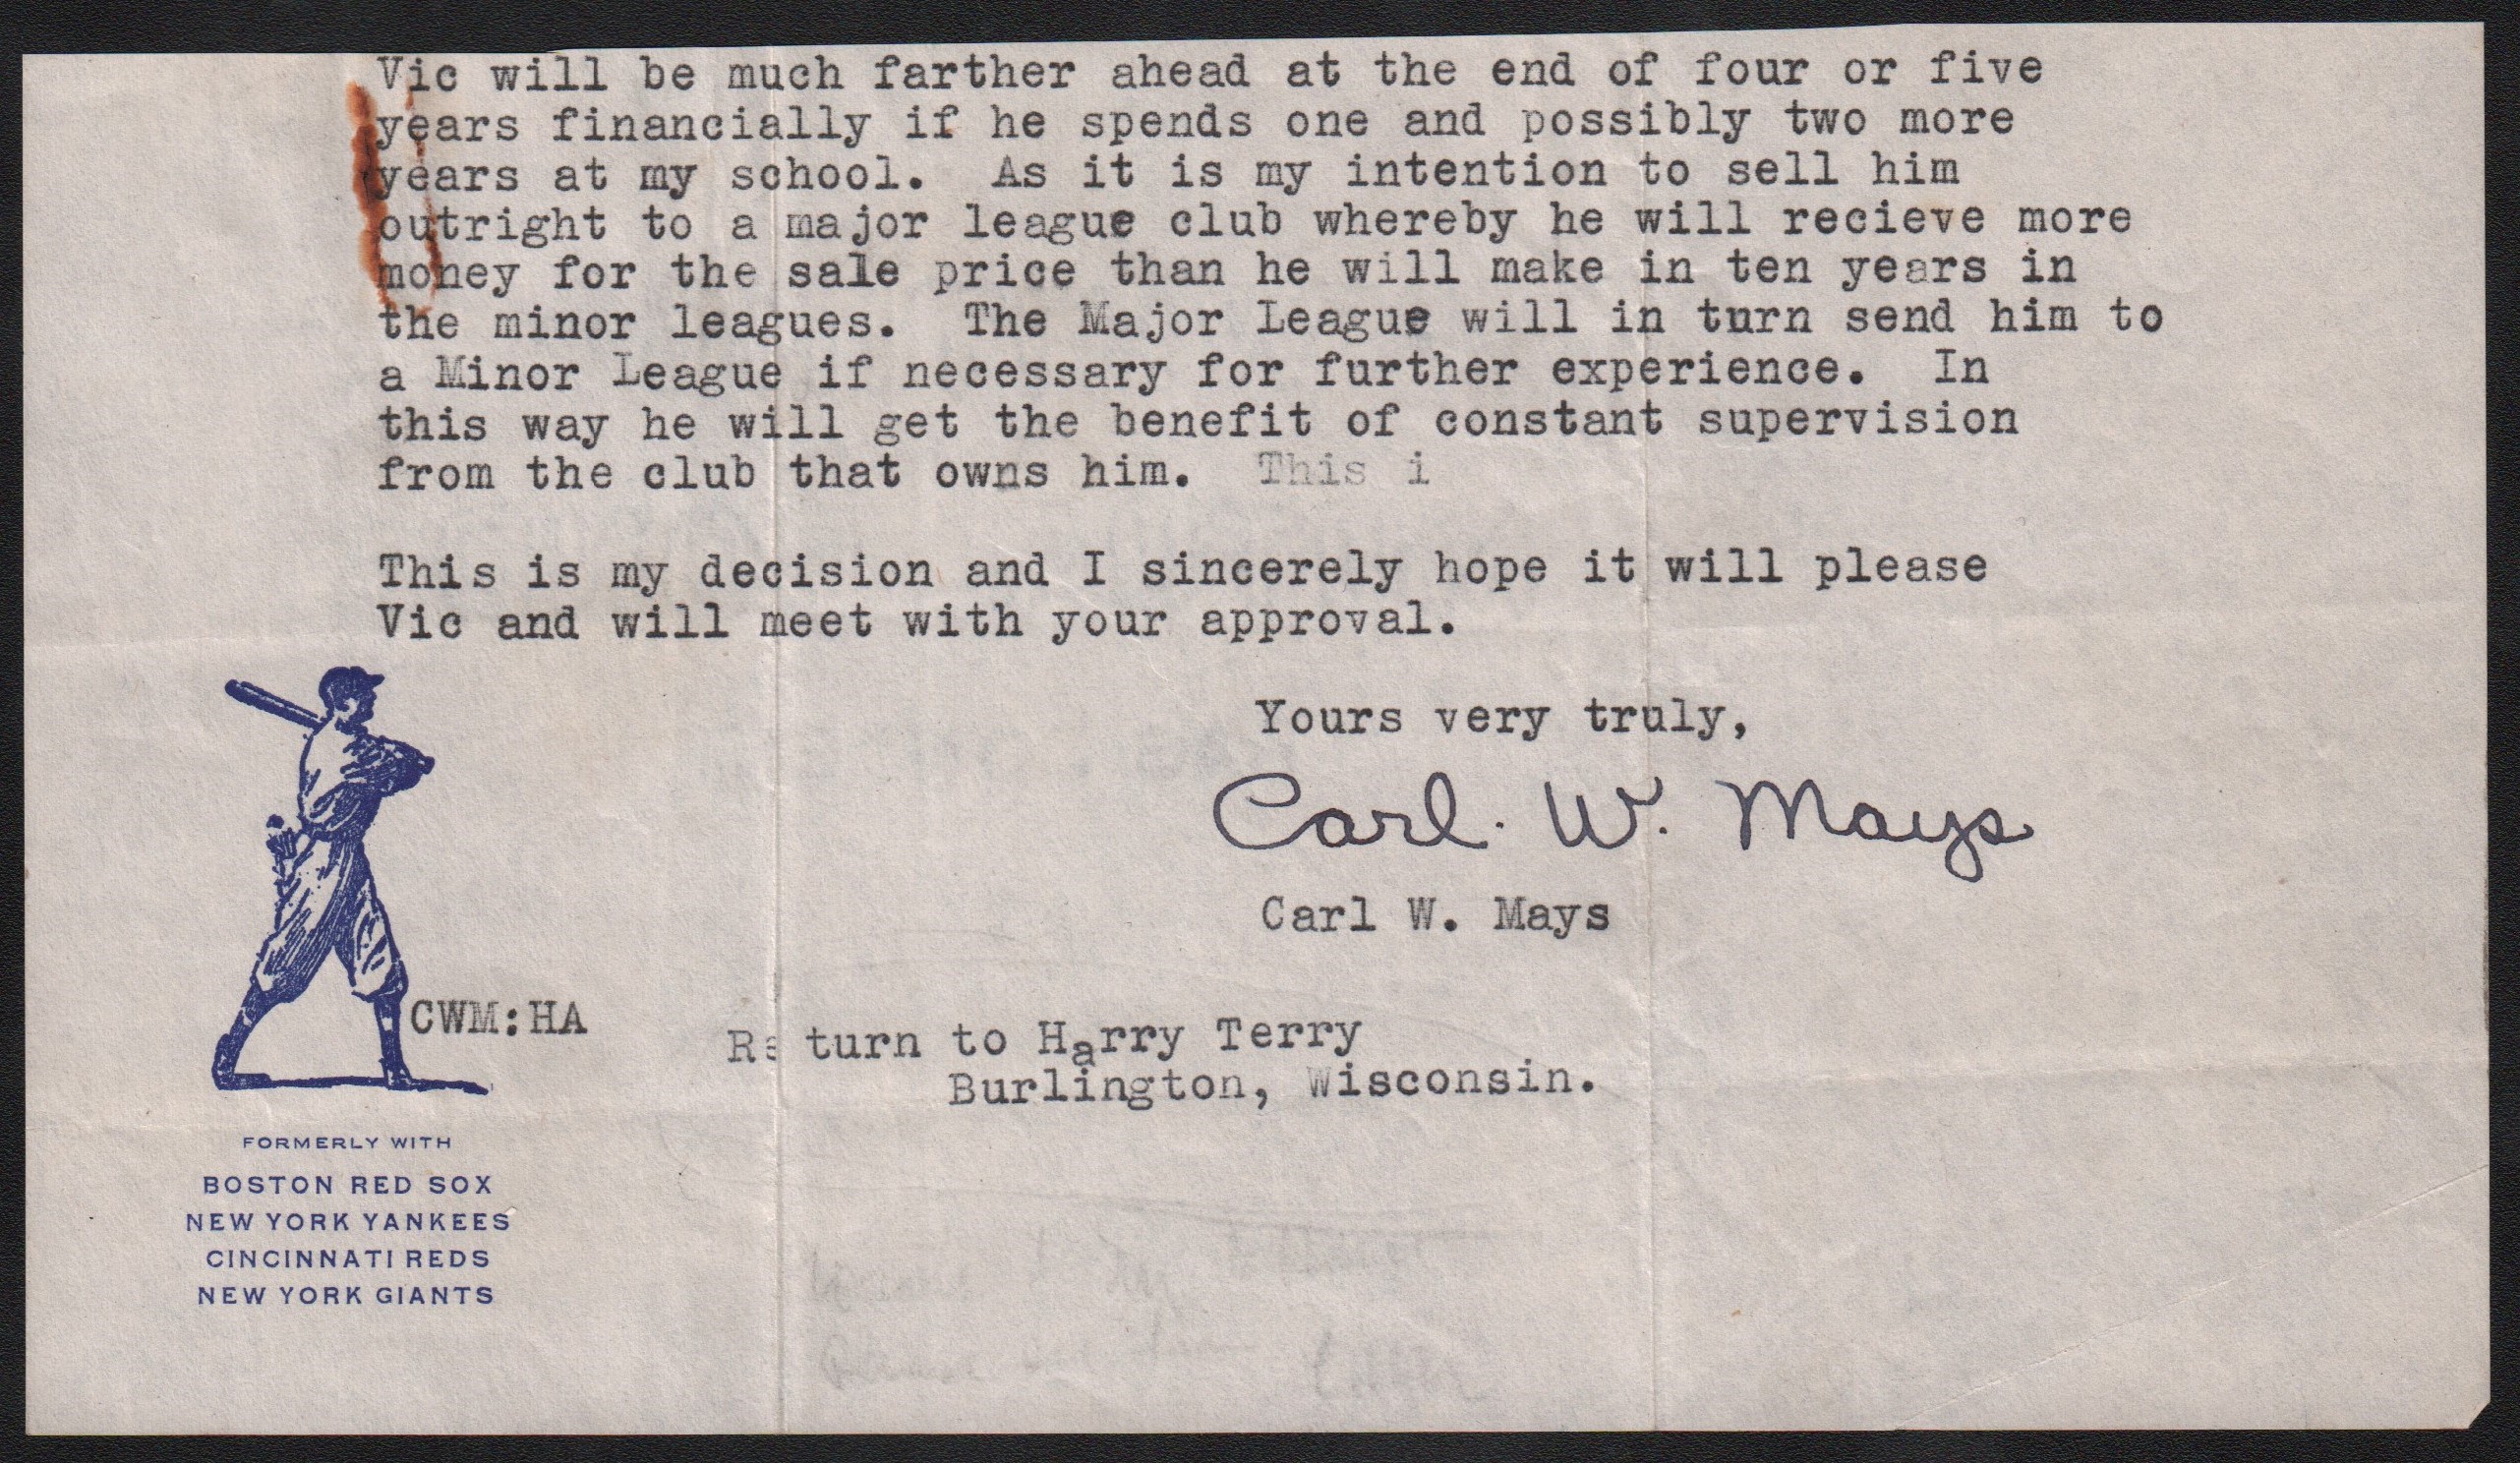 Early Baseball - Carl W. Mays Letter with Baseball Content